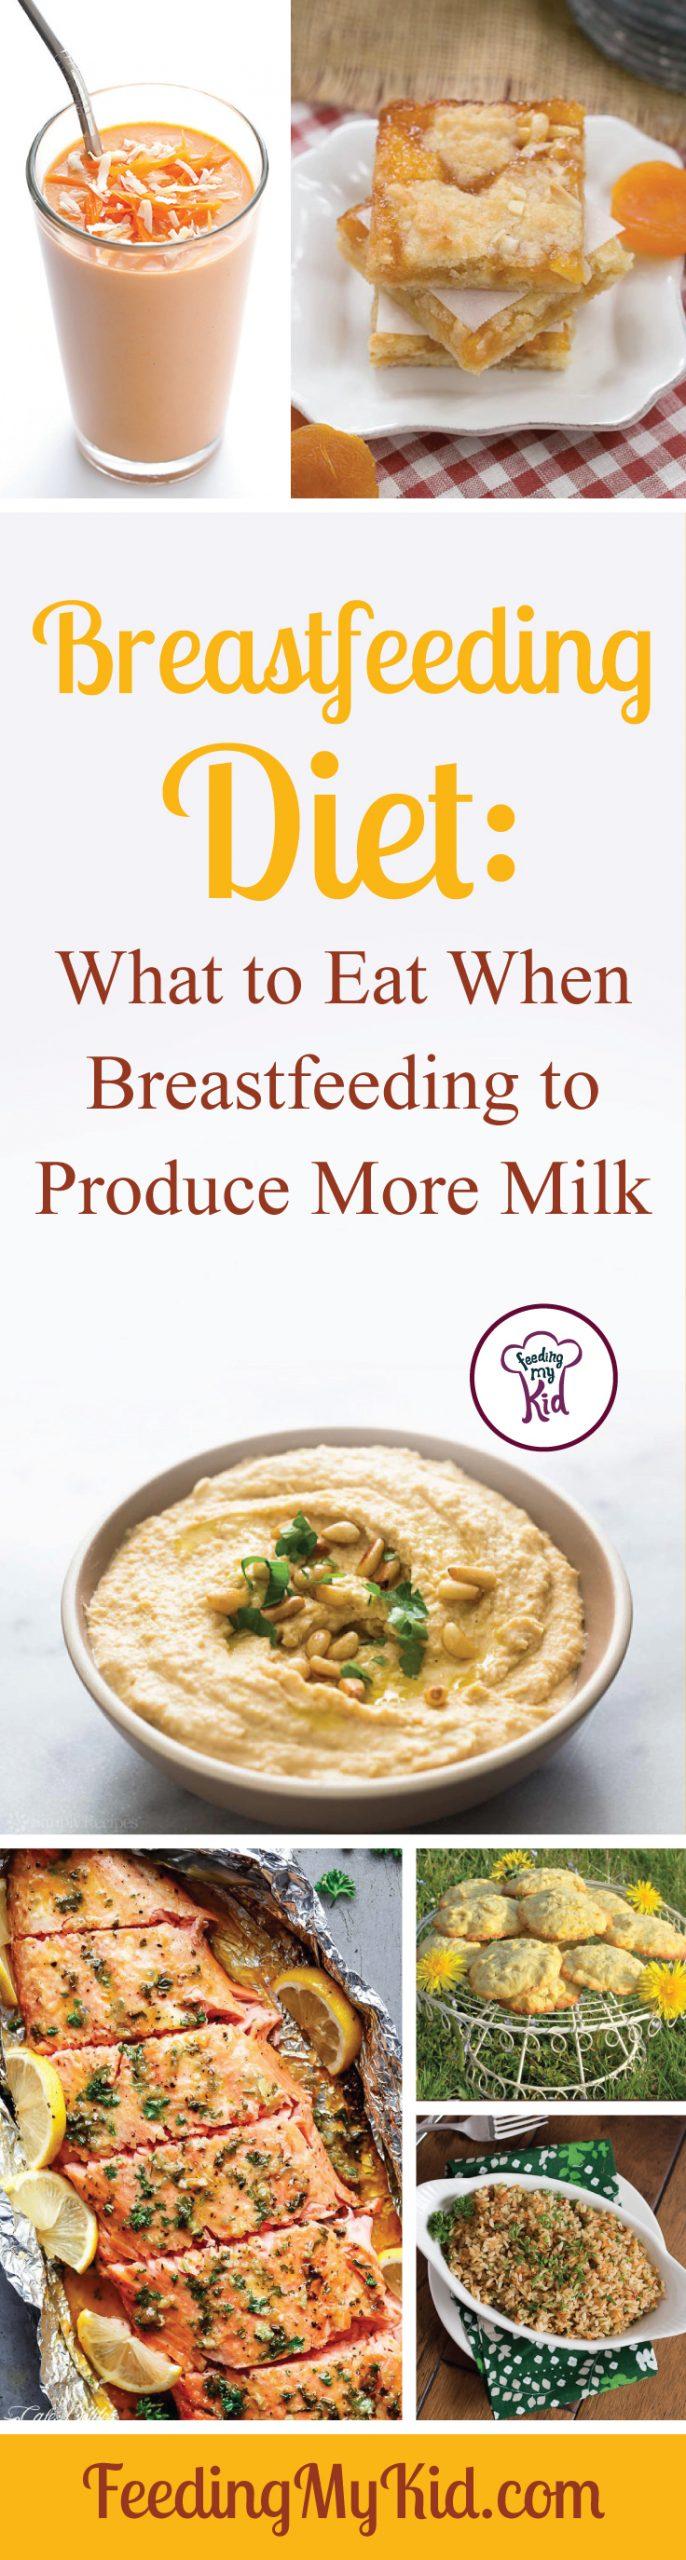 What should your breastfeeding diet be? Here're some great recipes to help breastfeeding moms produce more milk. Get inspired!